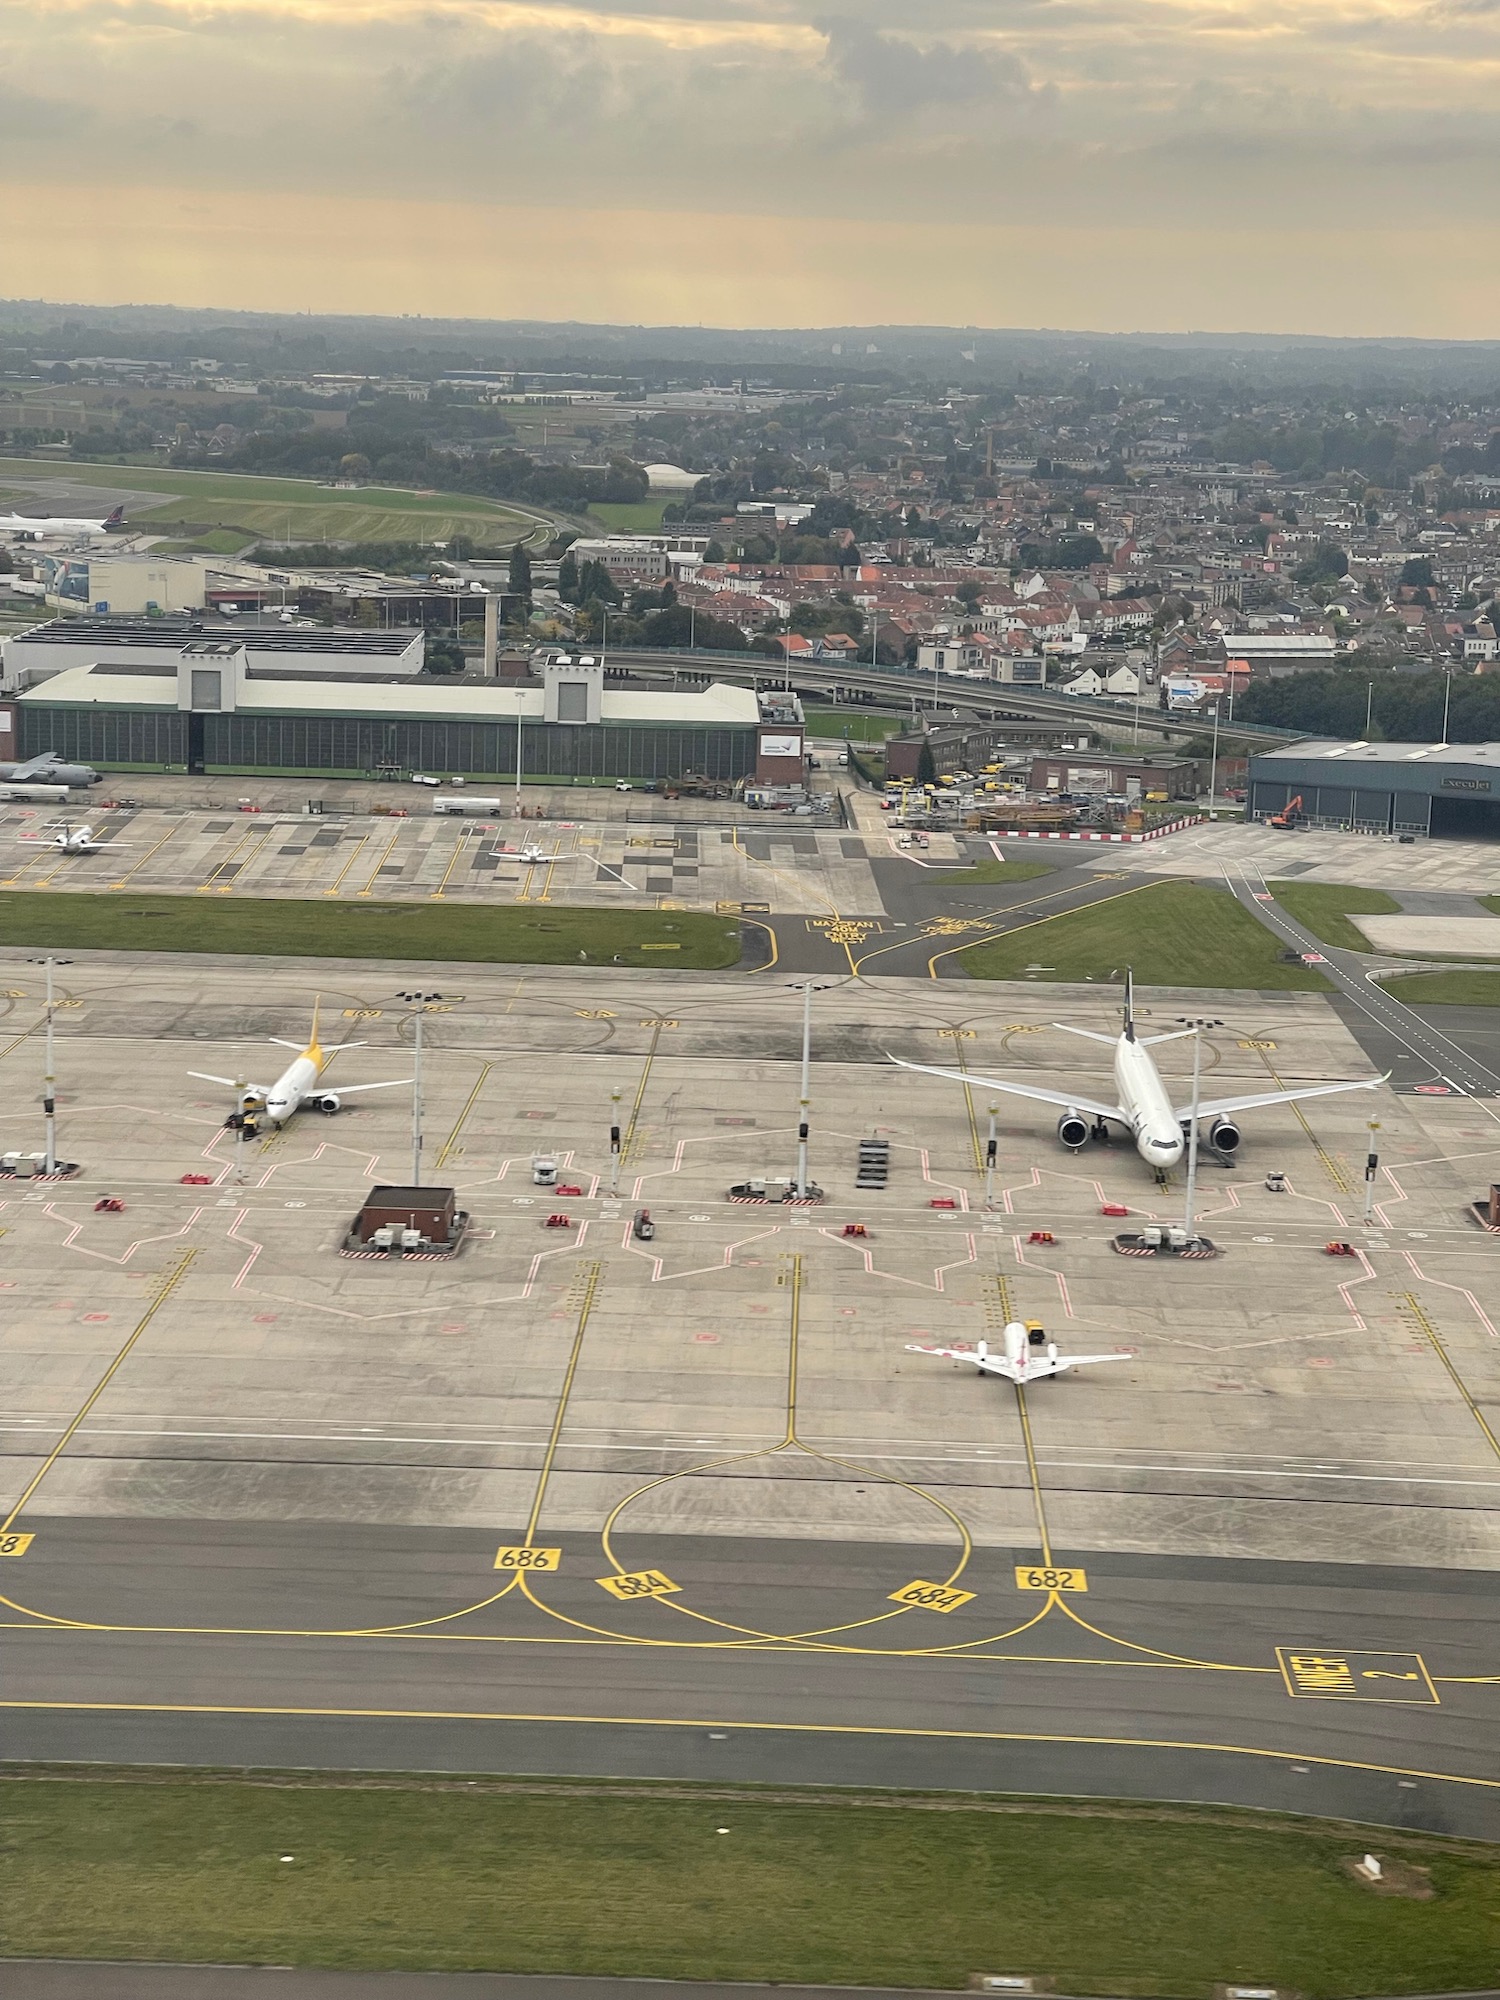 an aerial view of airplanes on a runway